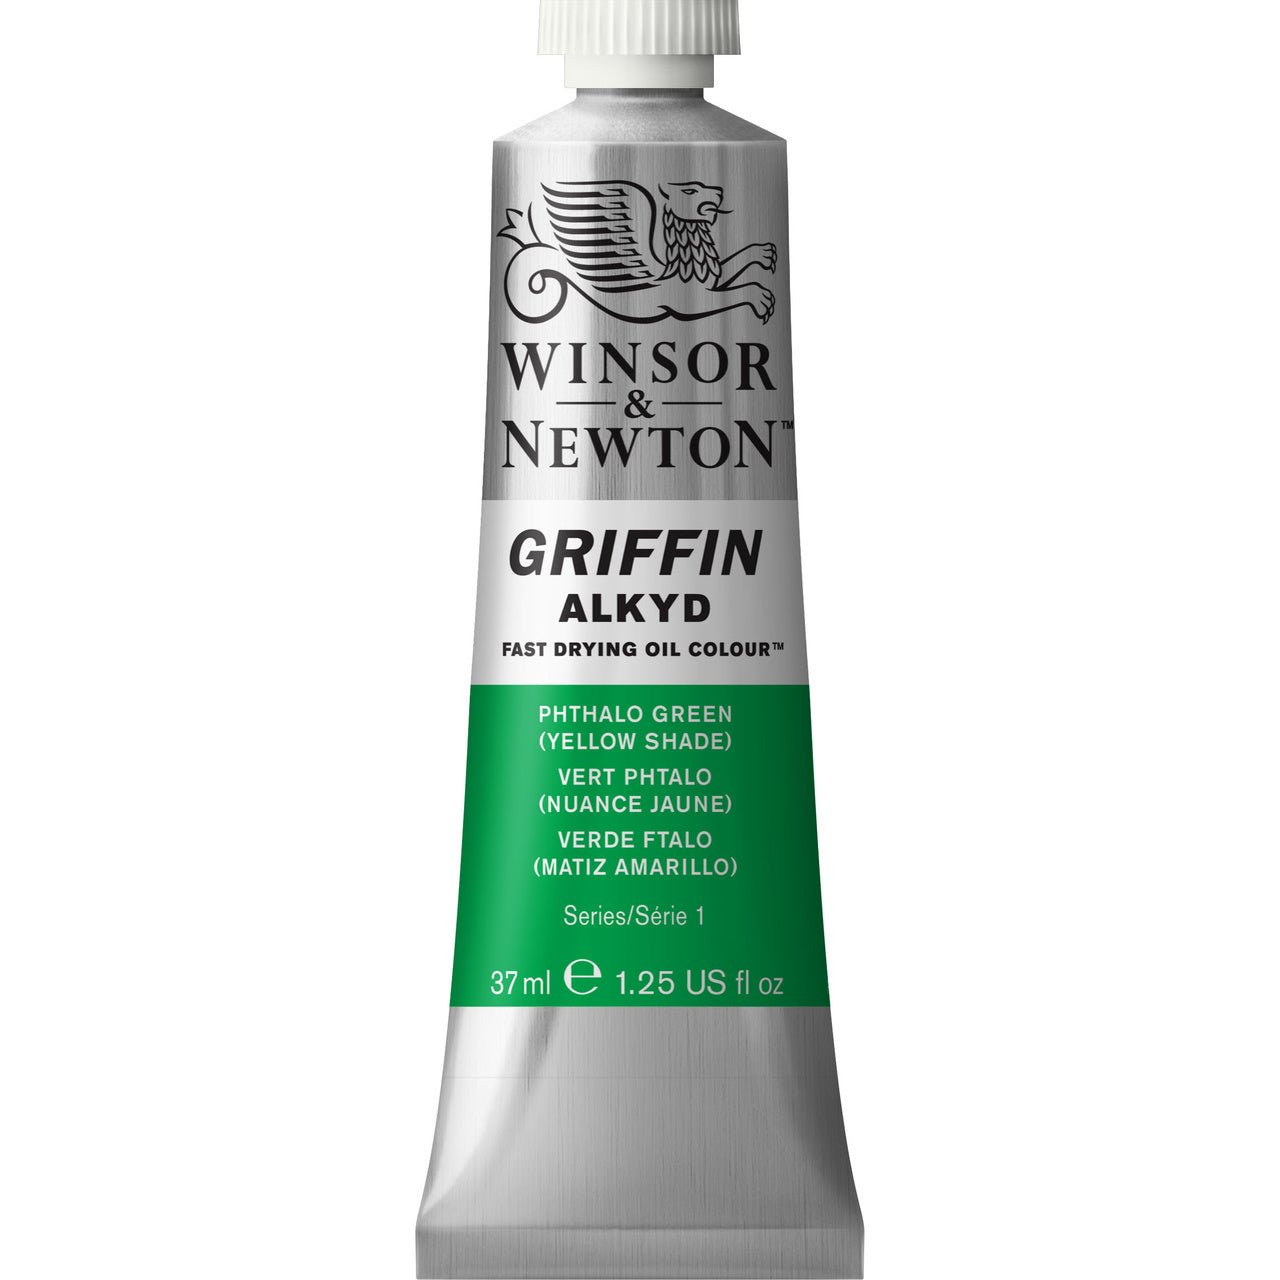 Winsor & Newton Griffin Alkyd 37ml Phthalo Green (Yellow shade) - merriartist.com